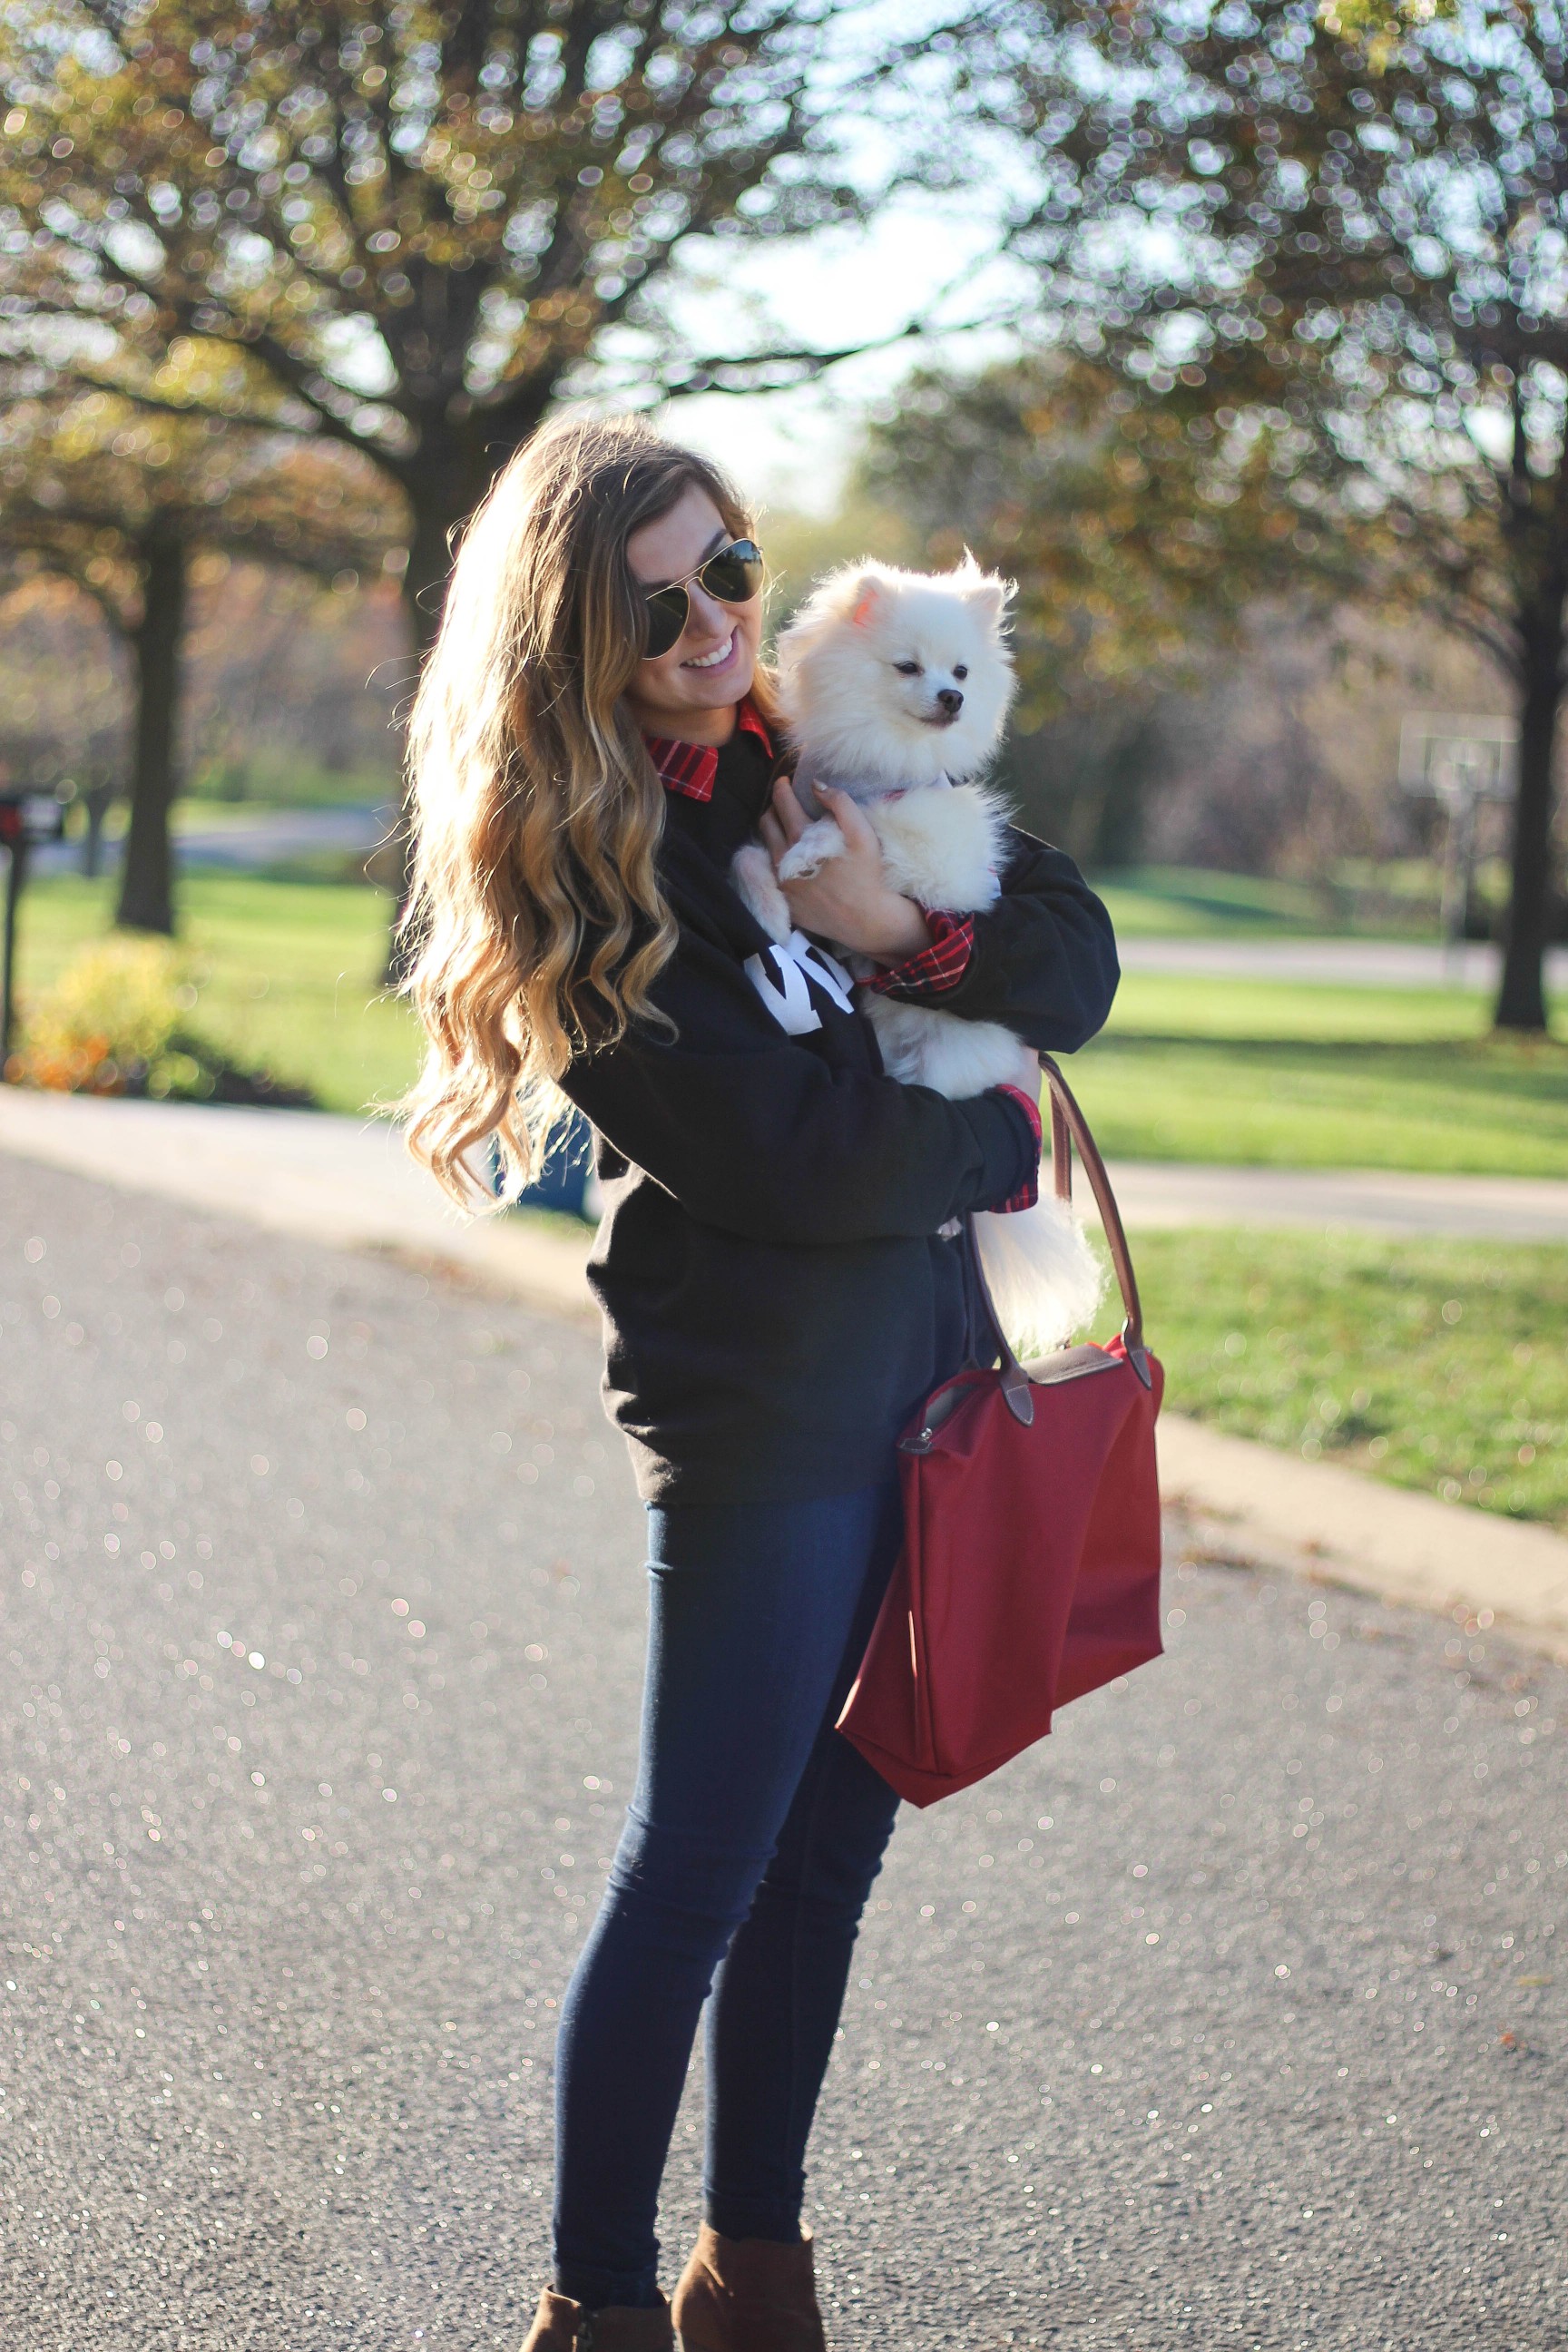 DIY Sweatshirt 2016 election day vote sweatshirt flannel layer outfit pomeranian OOTD outfit by daily dose of charm by lauren lindmark